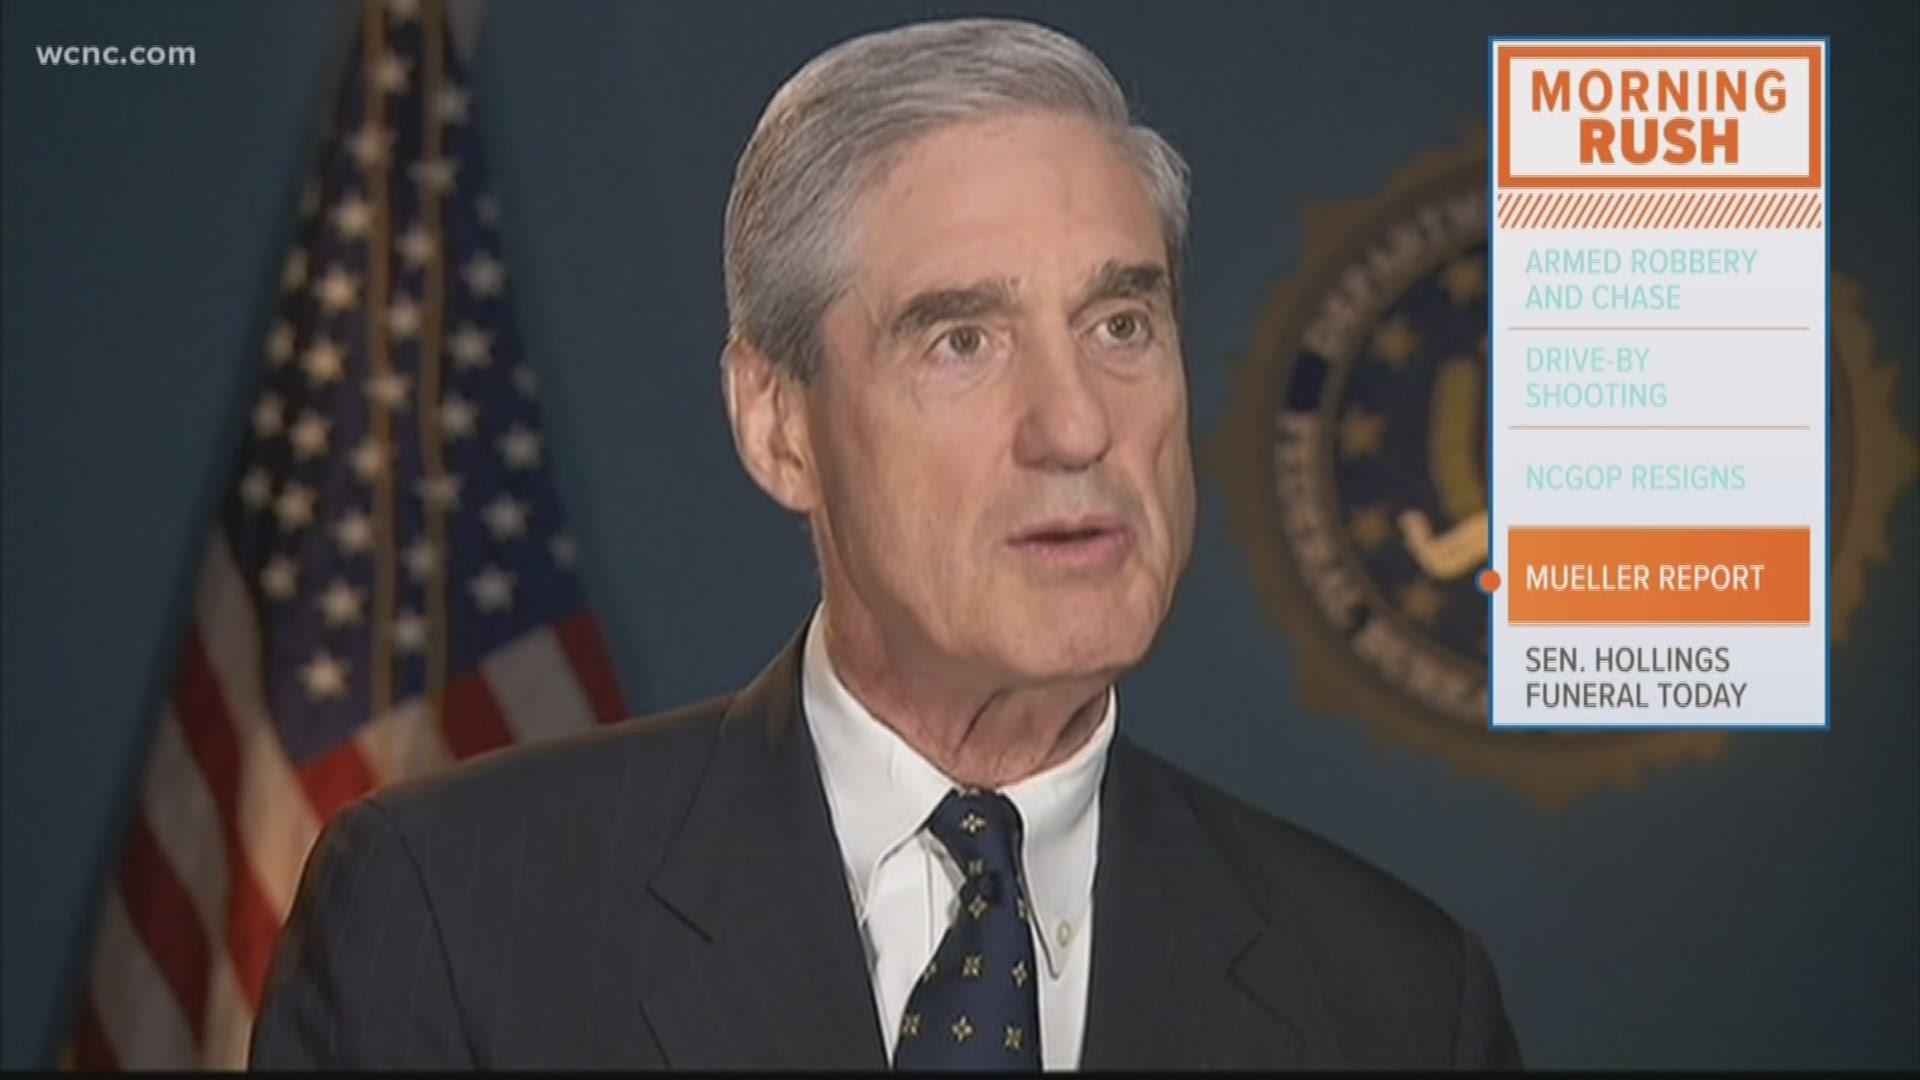 The U.S. Justice Department said a redacted version of Robert Mueller's report will be released to Congress Thursday, giving the American public its first look at what the special counsel found during the Russia investigation.